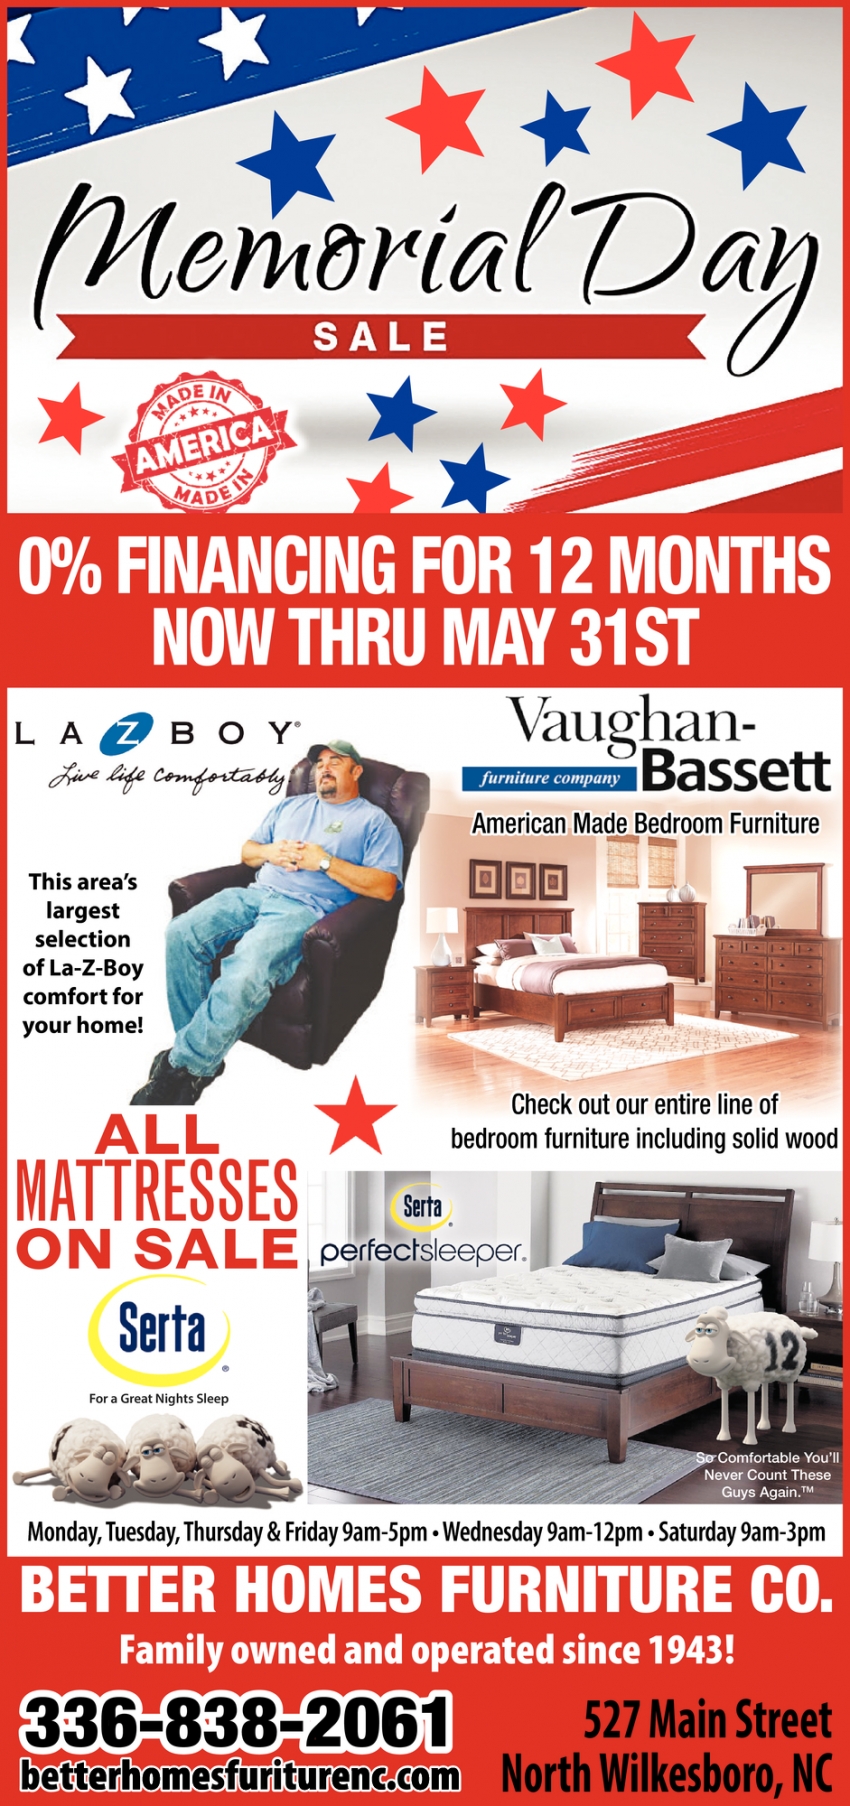 0% Financing for 12 Months